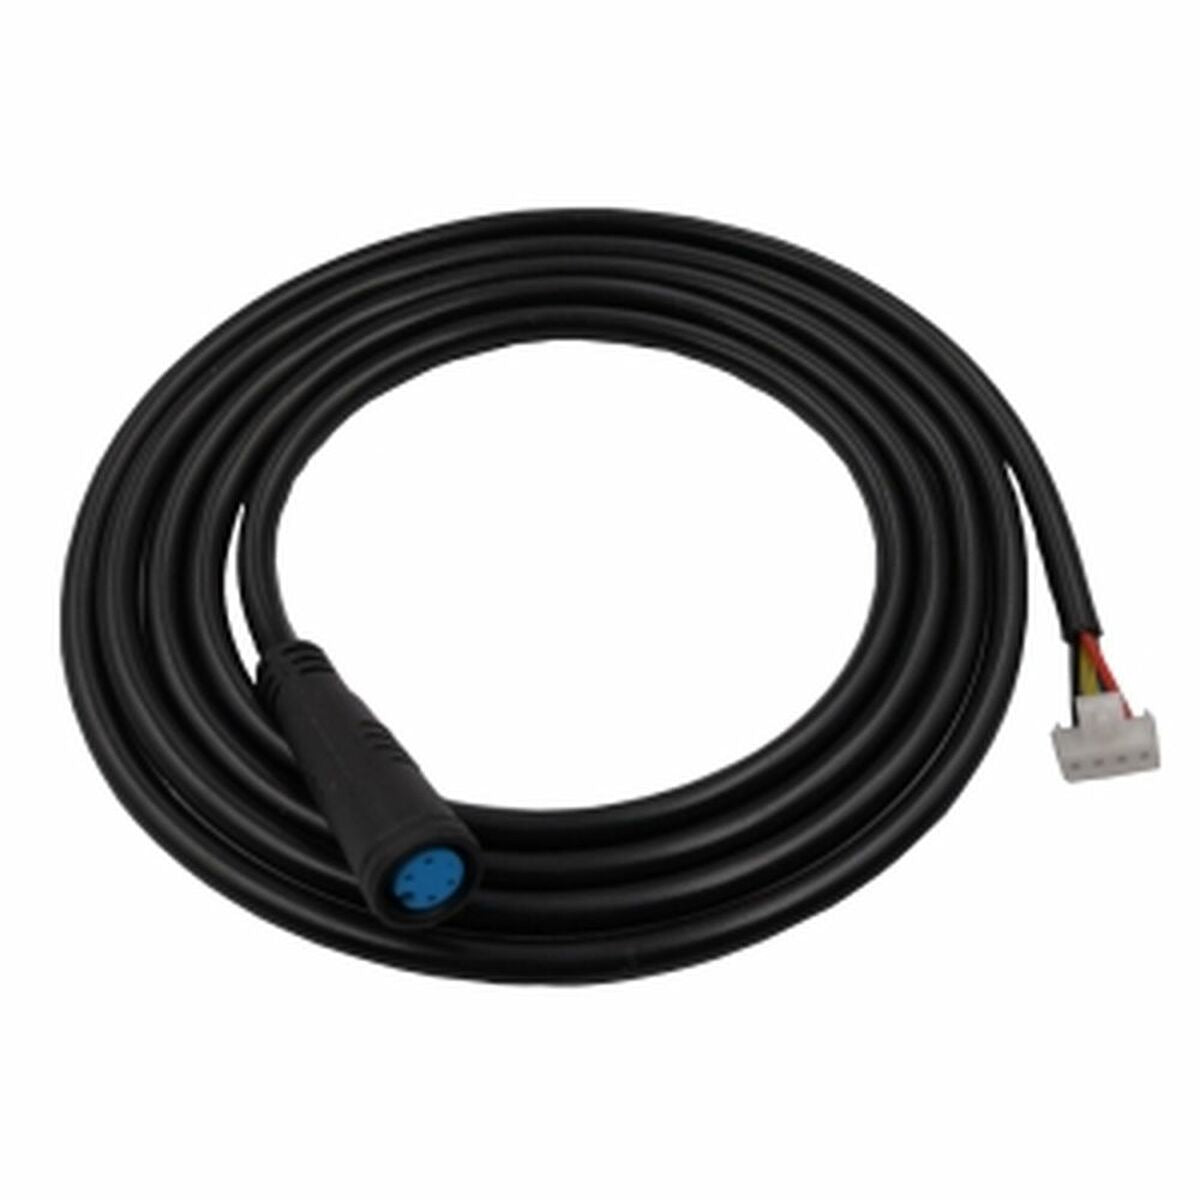 Cable Urban Scout M-9 (1270 mm), Urban Scout, Sports and outdoors, Urban mobility, cable-urban-scout-m-9-1270-mm, Brand_Urban Scout, category-reference-2609, category-reference-2629, category-reference-2904, category-reference-t-19681, category-reference-t-19756, category-reference-t-19876, category-reference-t-21245, Condition_NEW, deportista / en forma, Price_20 - 50, RiotNook